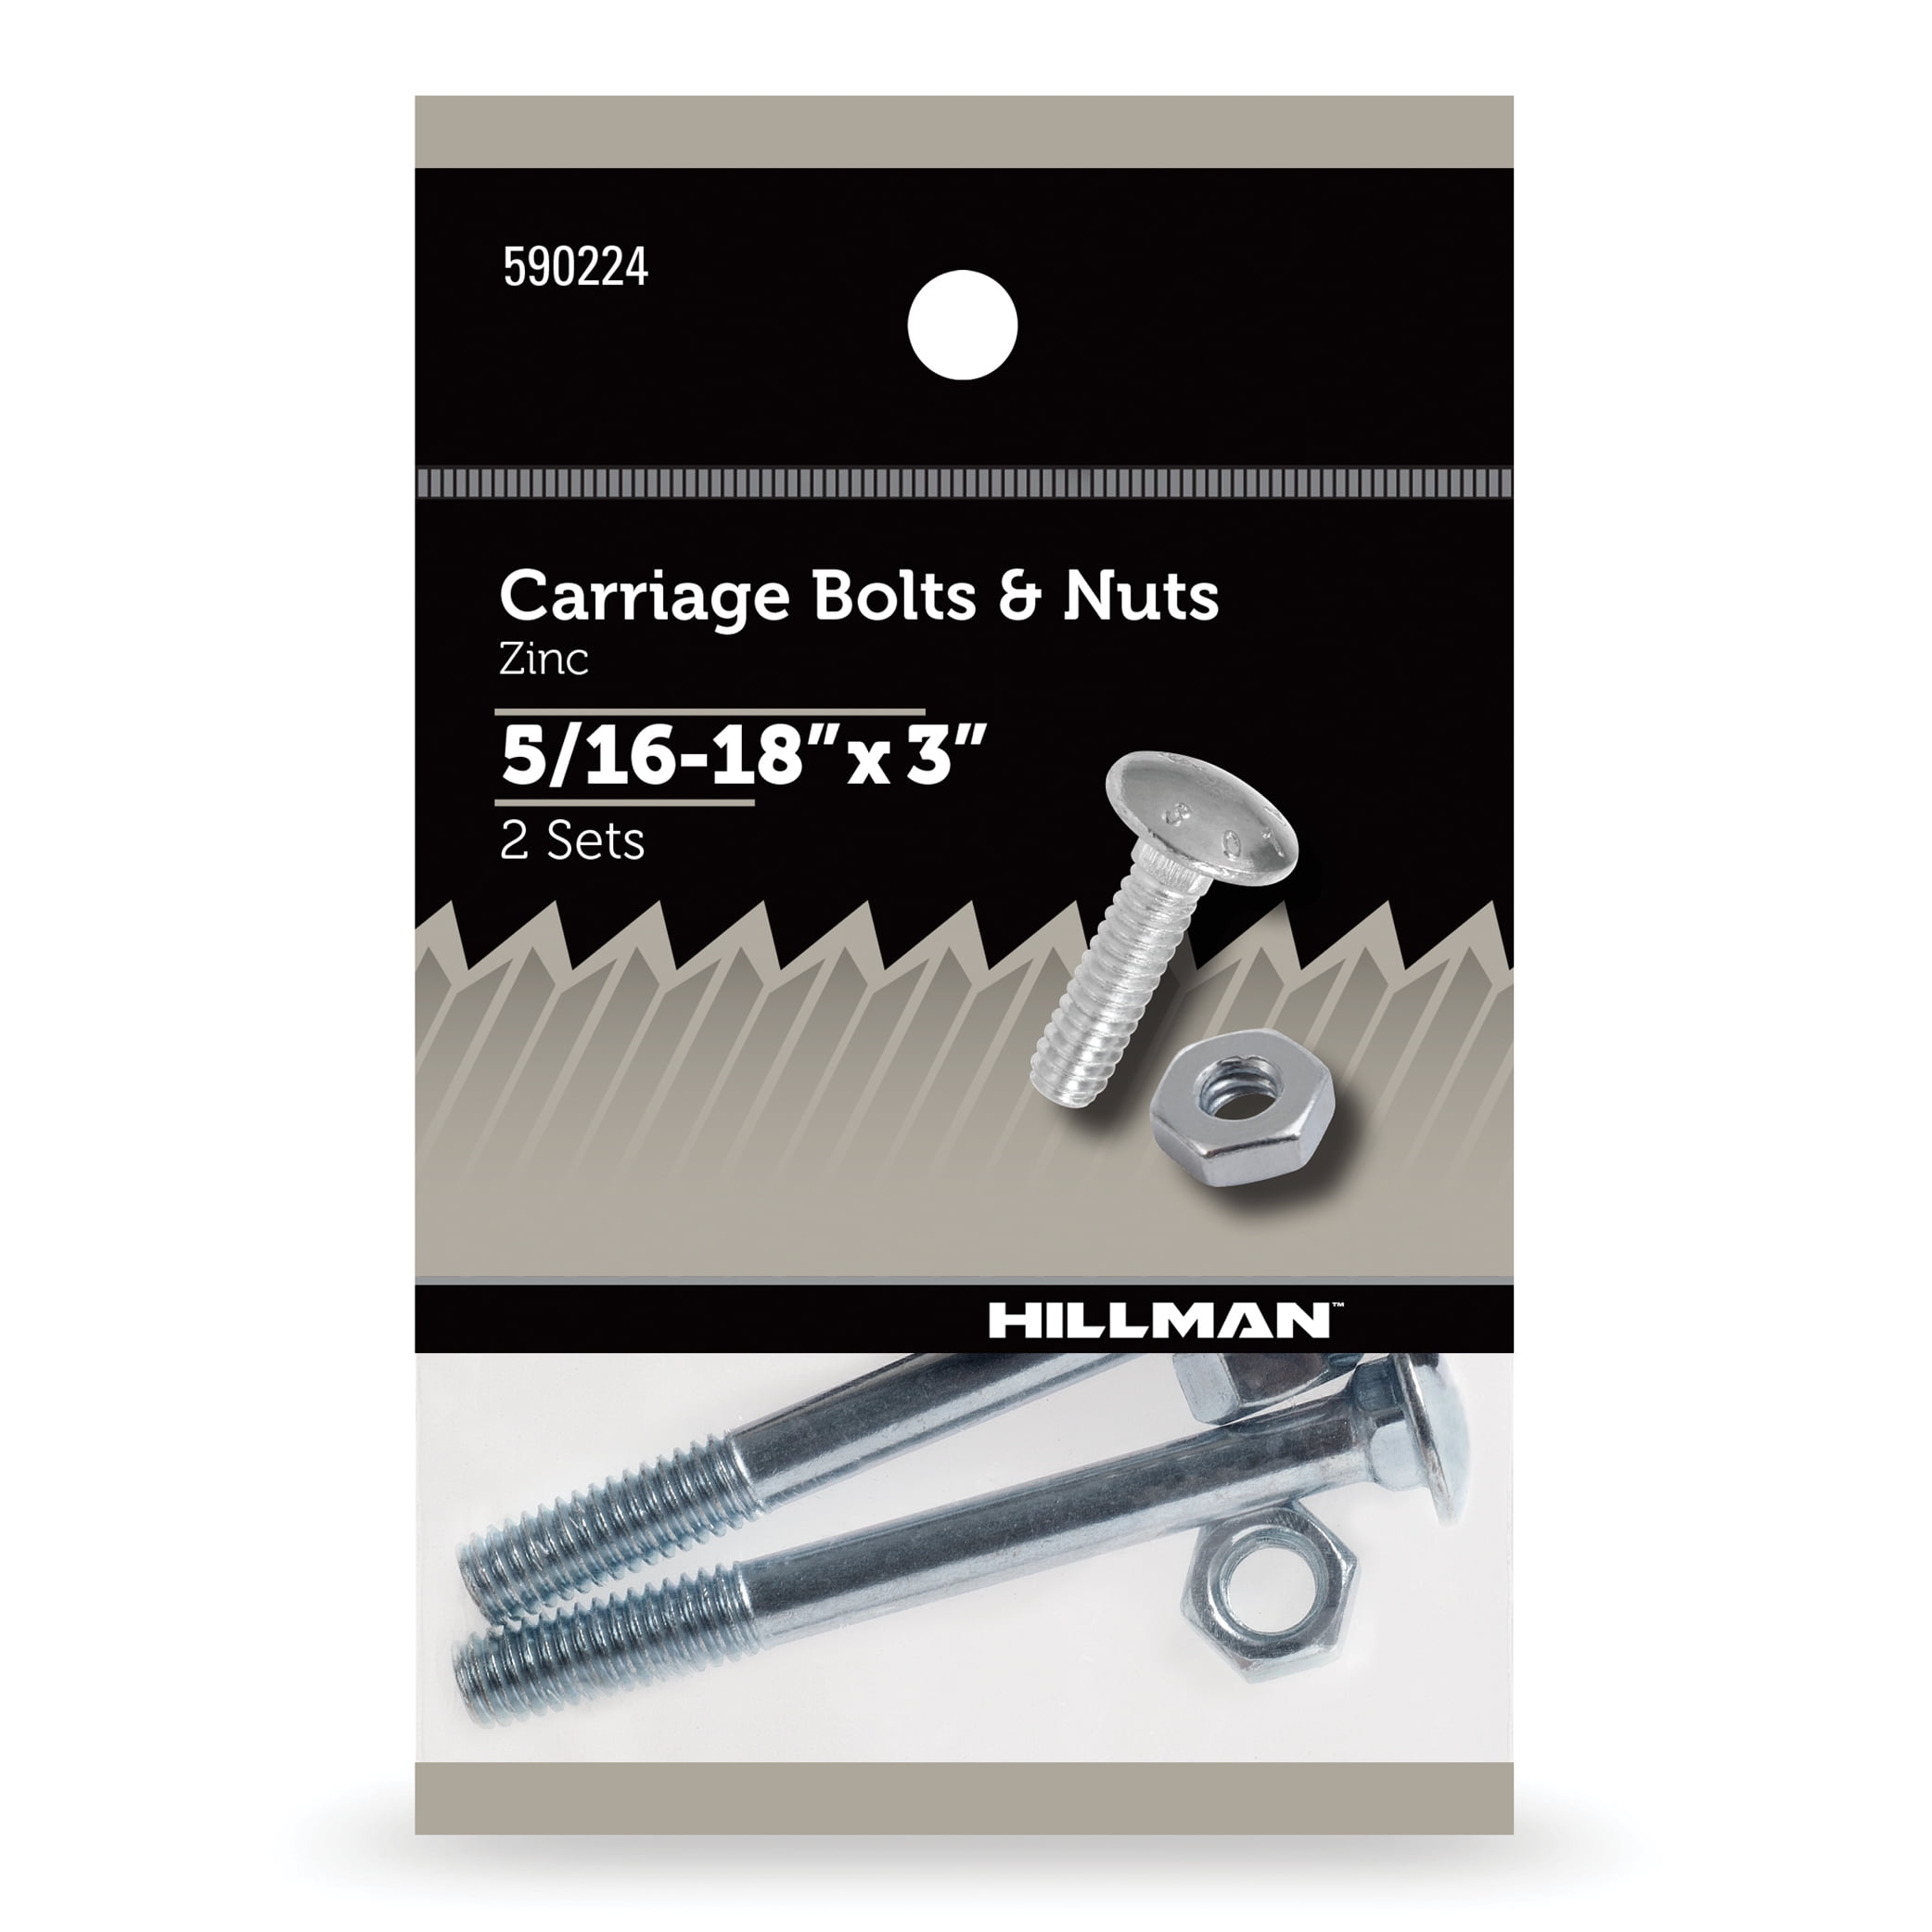 Hillman Carriage Bolts and Nuts, 5/16-18" x 3", Zinc Plated, Steel, 2 Sets